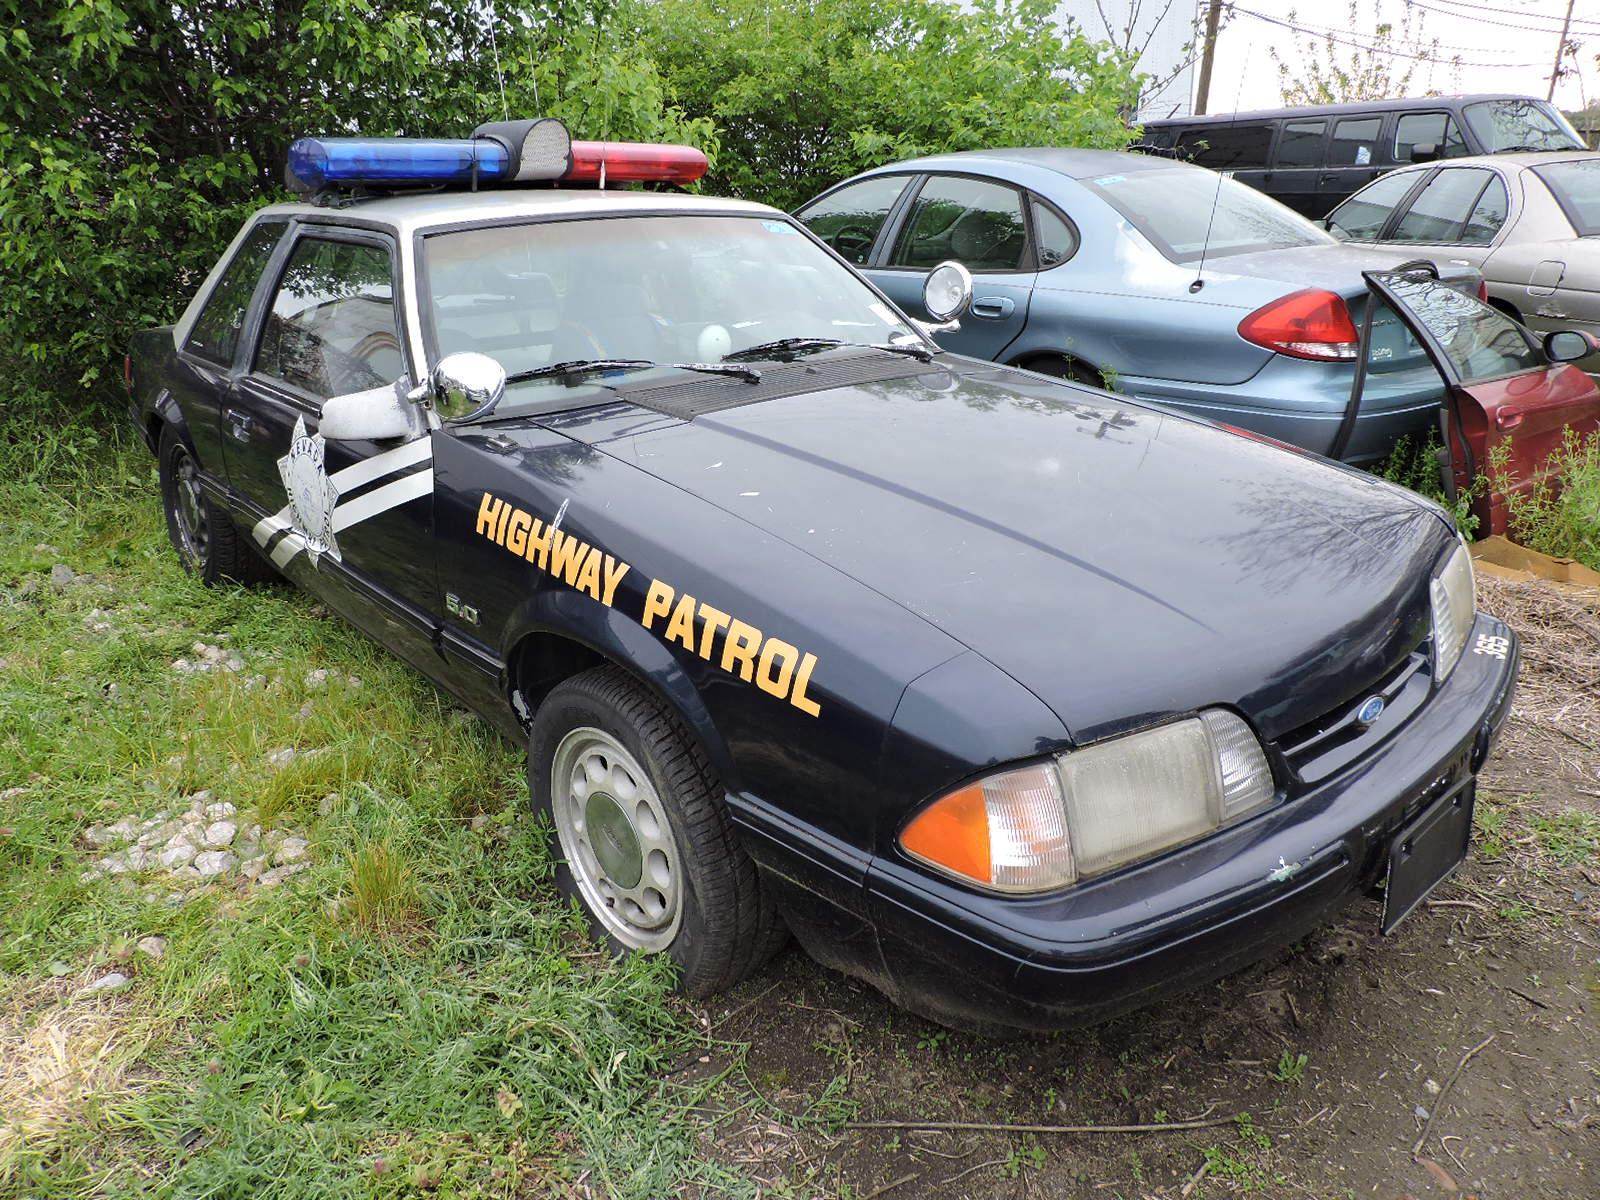 1993 Nevada Highway Patrol Mustang SSP Coupe with All Original Equipment